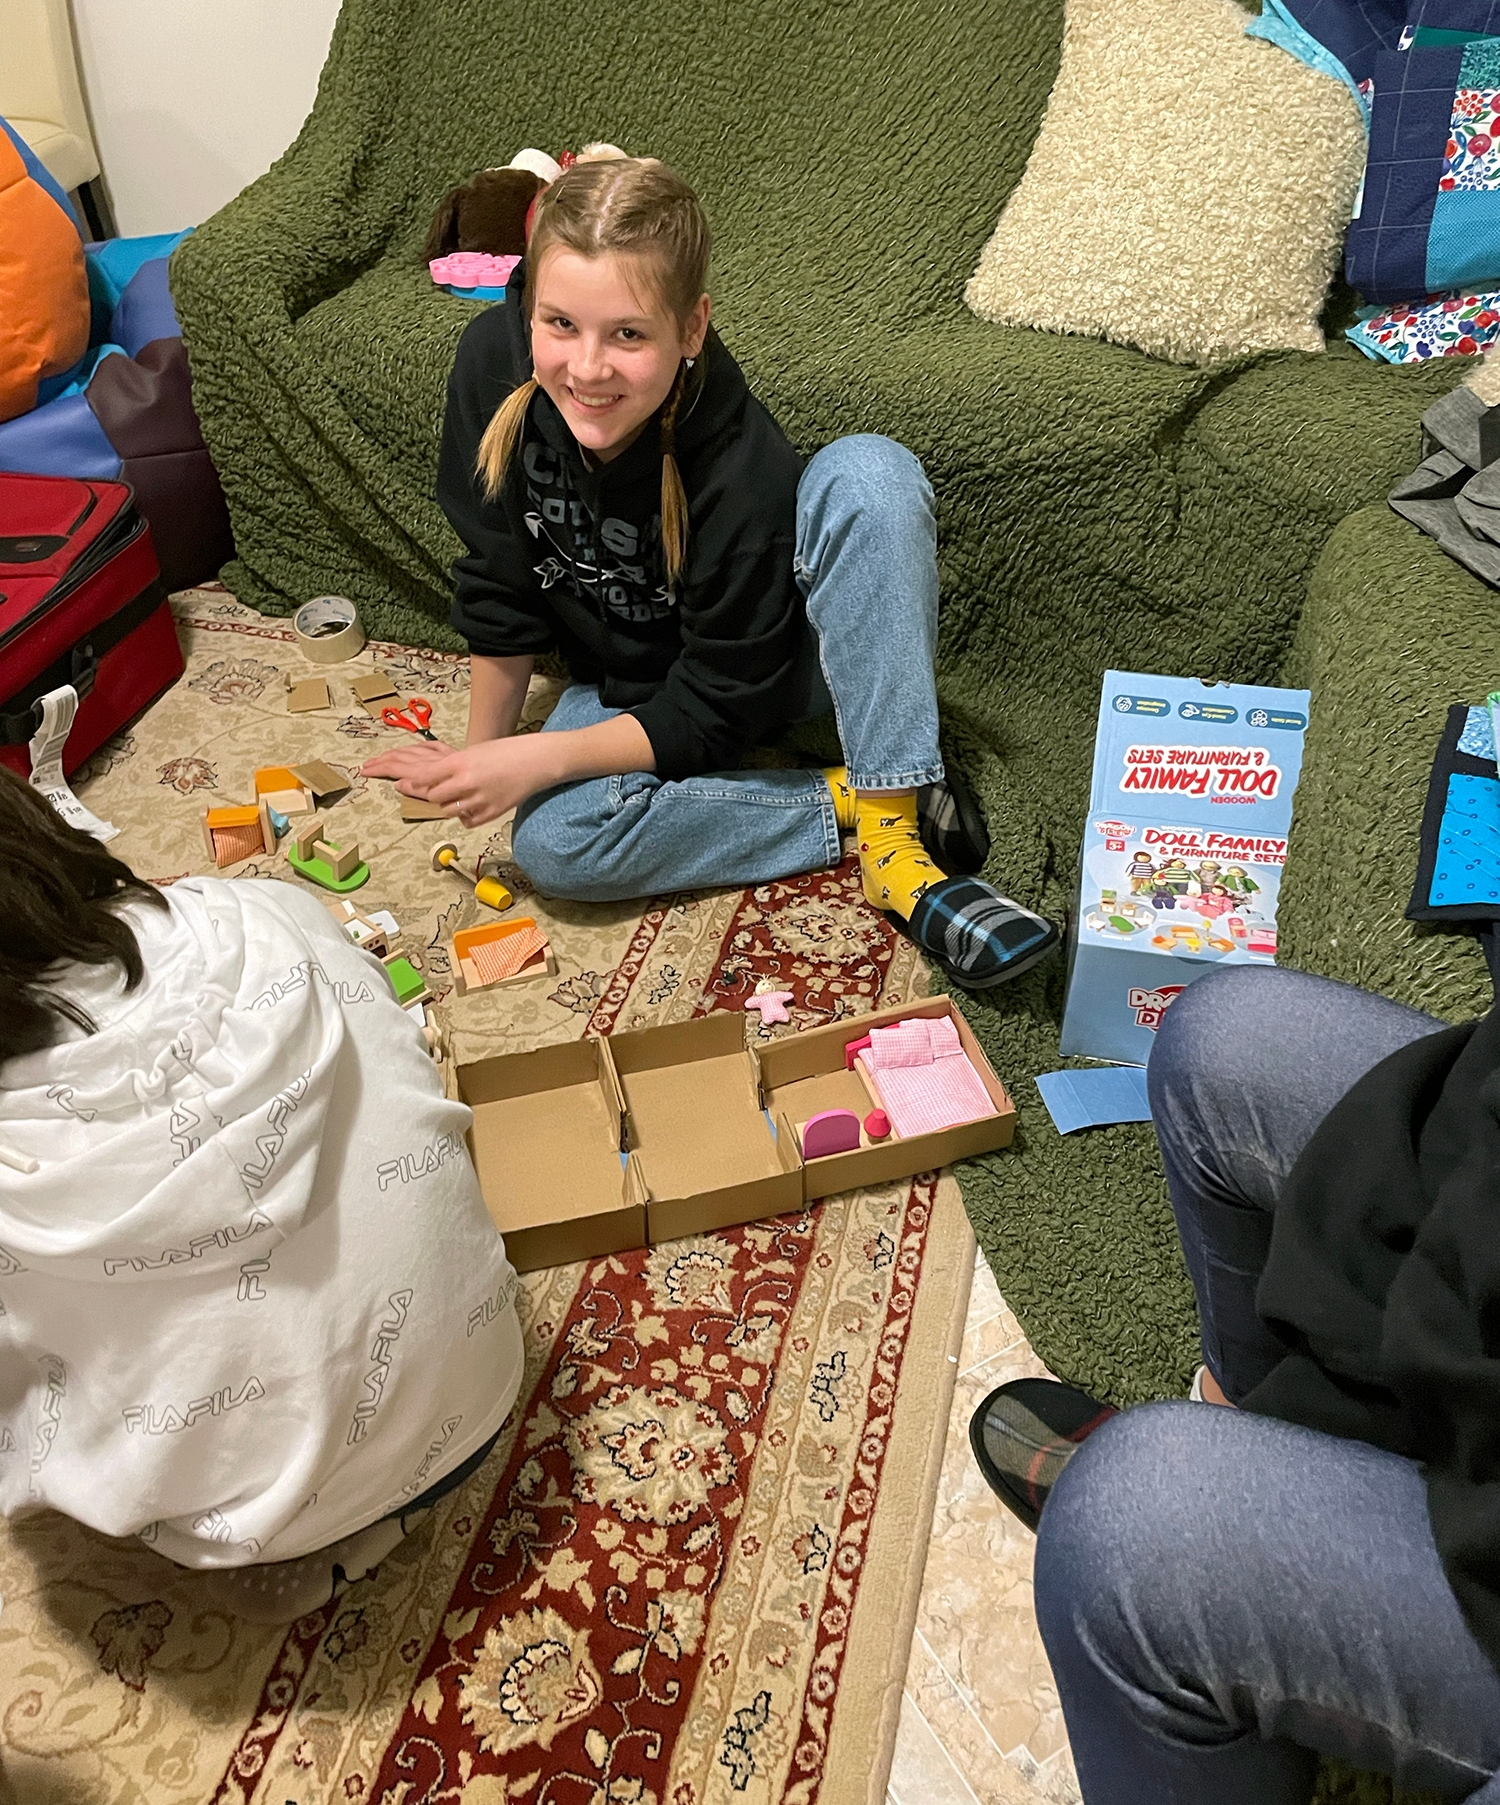 Vika, who just turned 13, gets ready to set up the dollhouse furniture during a play therapy session with Jenny.